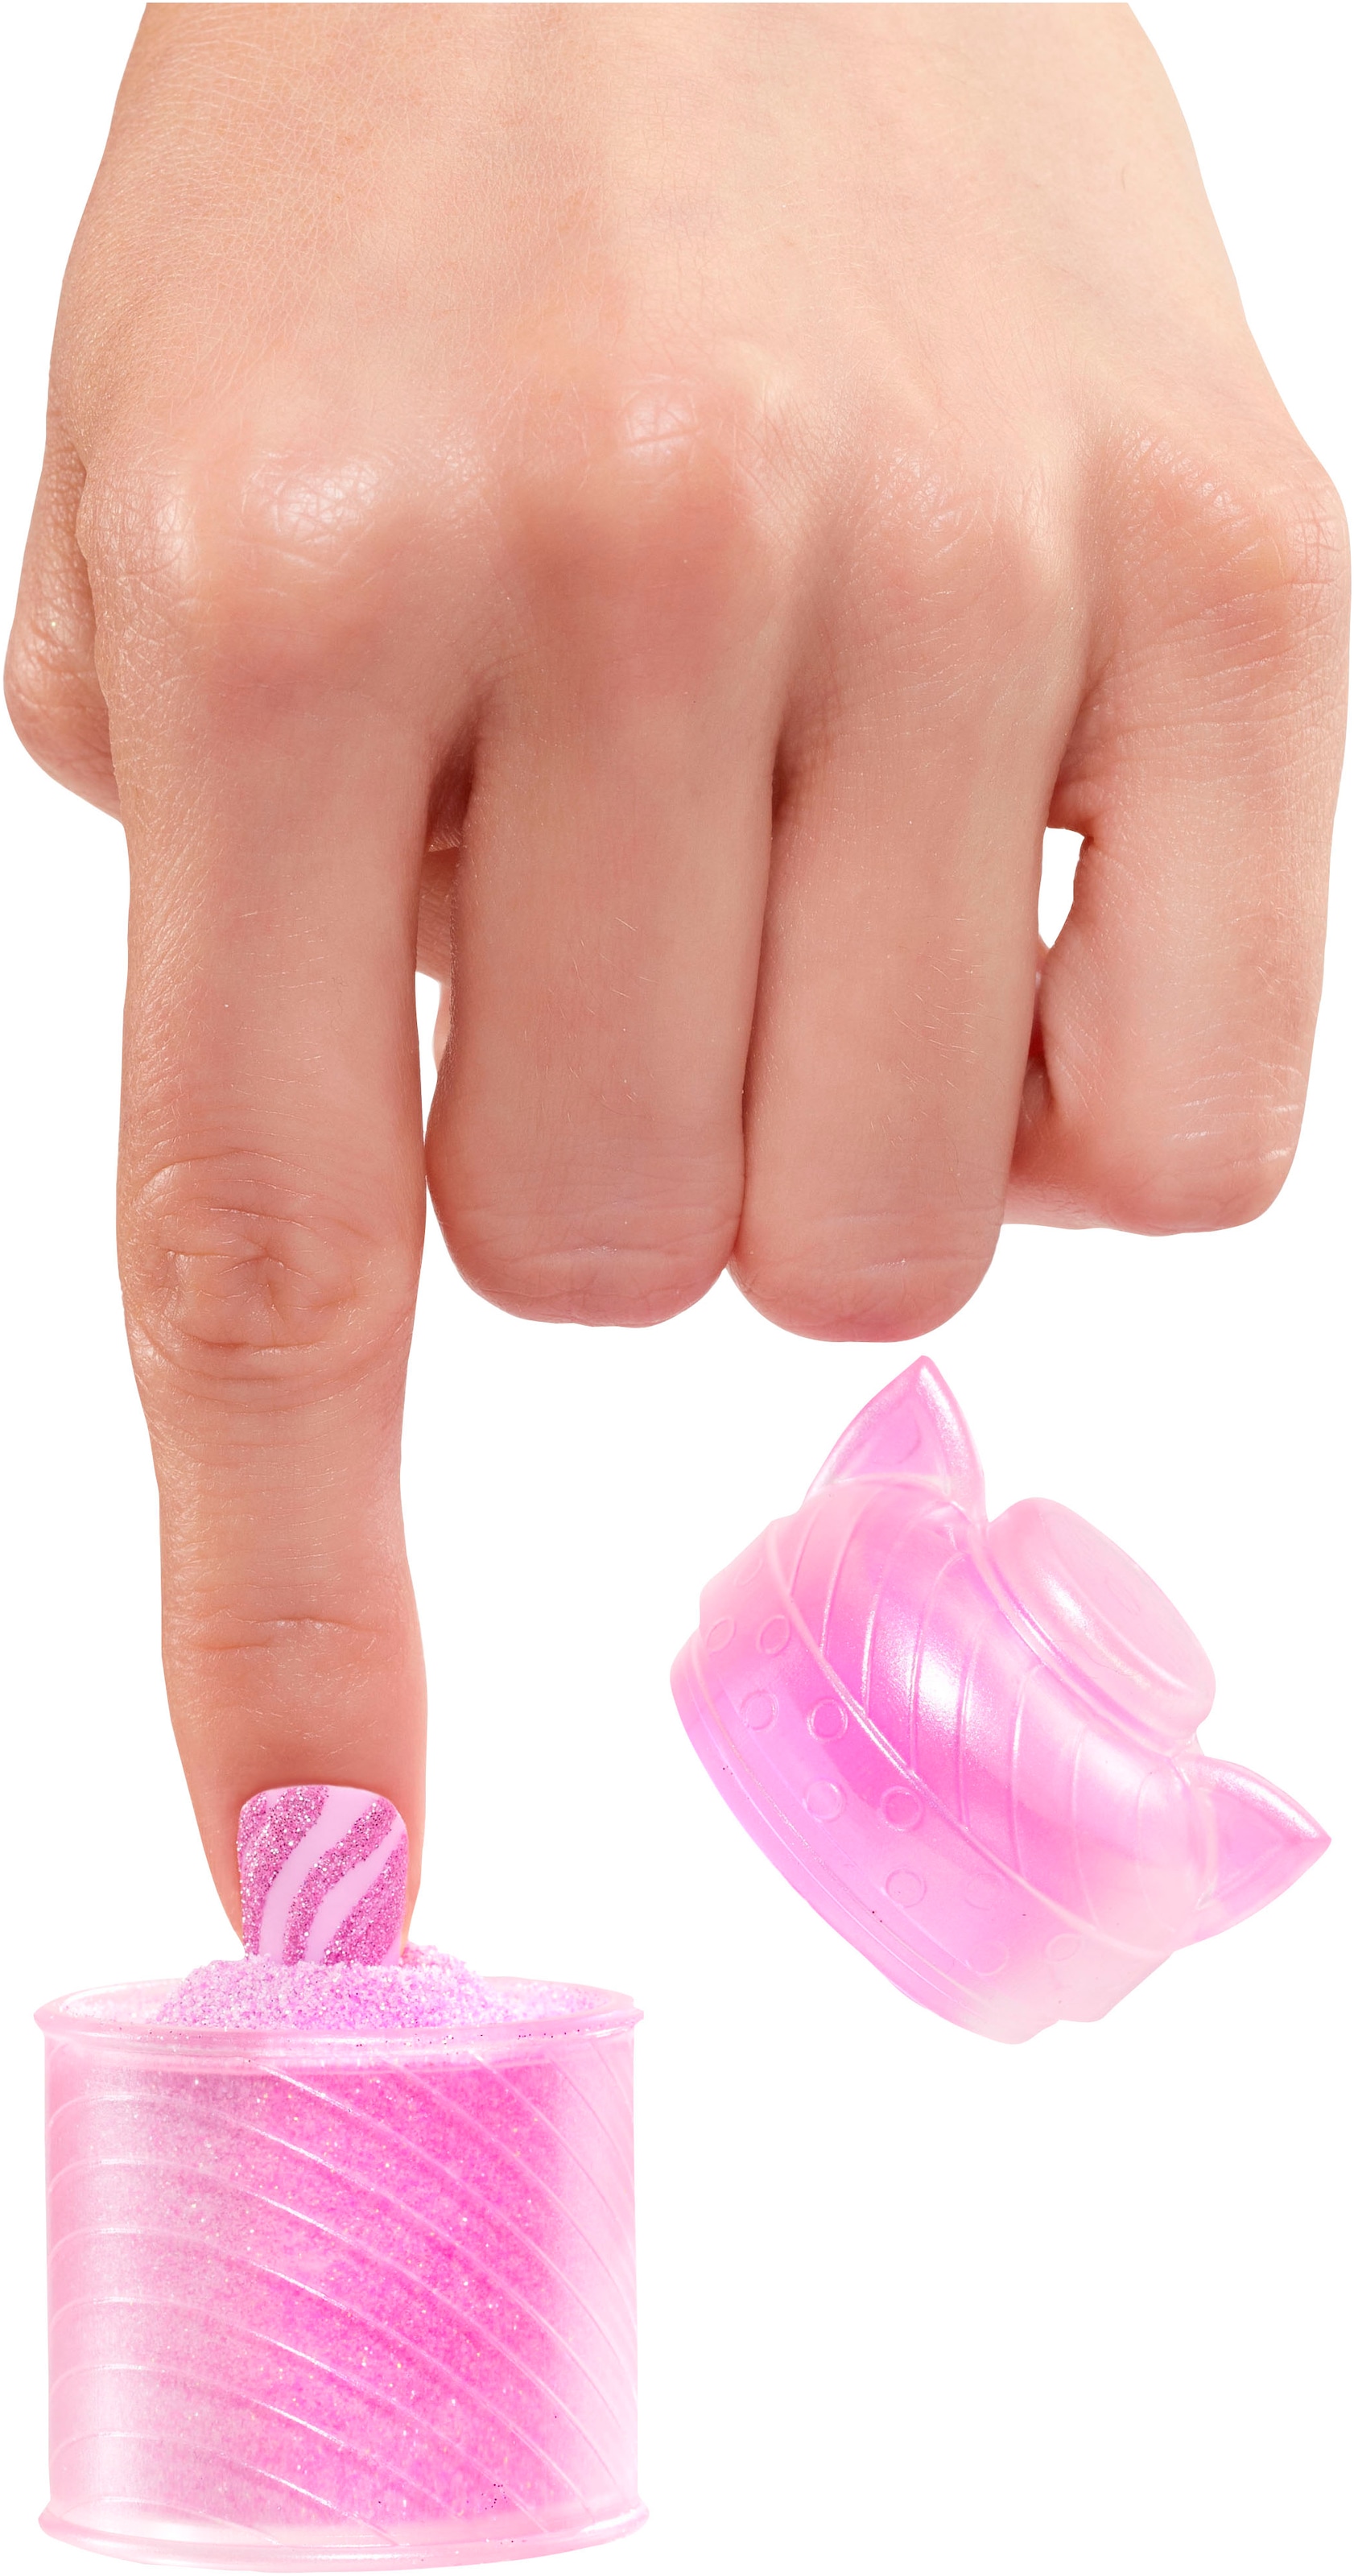 L.O.L. SURPRISE! Anziehpuppe »L.O.L. Surprise O.M.G. Sweet Nails - Pinky Pops«